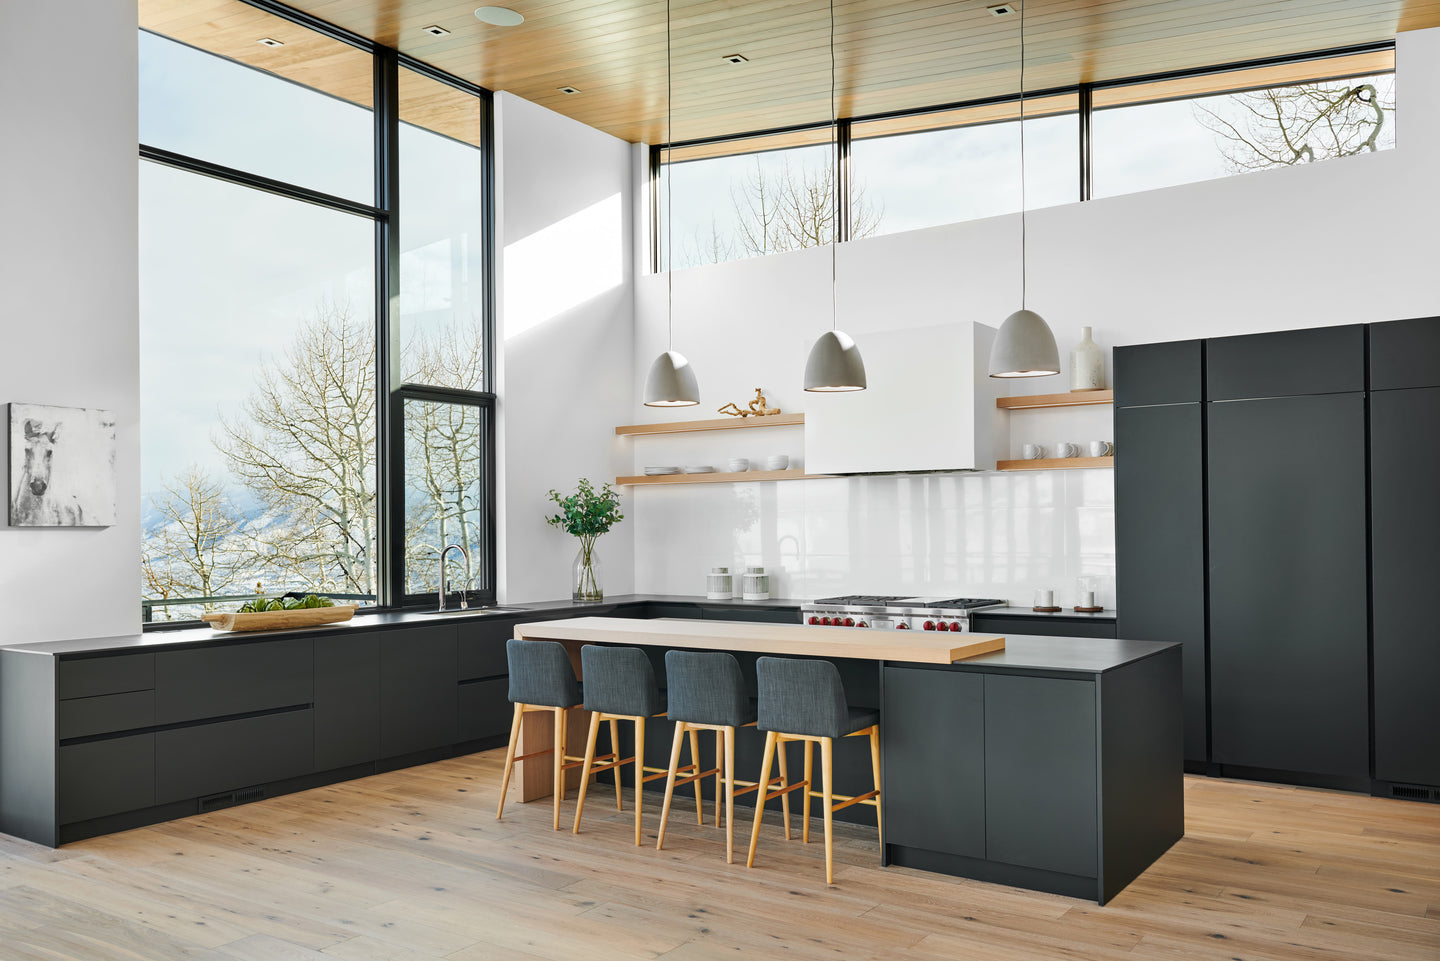 kitchen with black cabinets and island with stools and hanging lamps